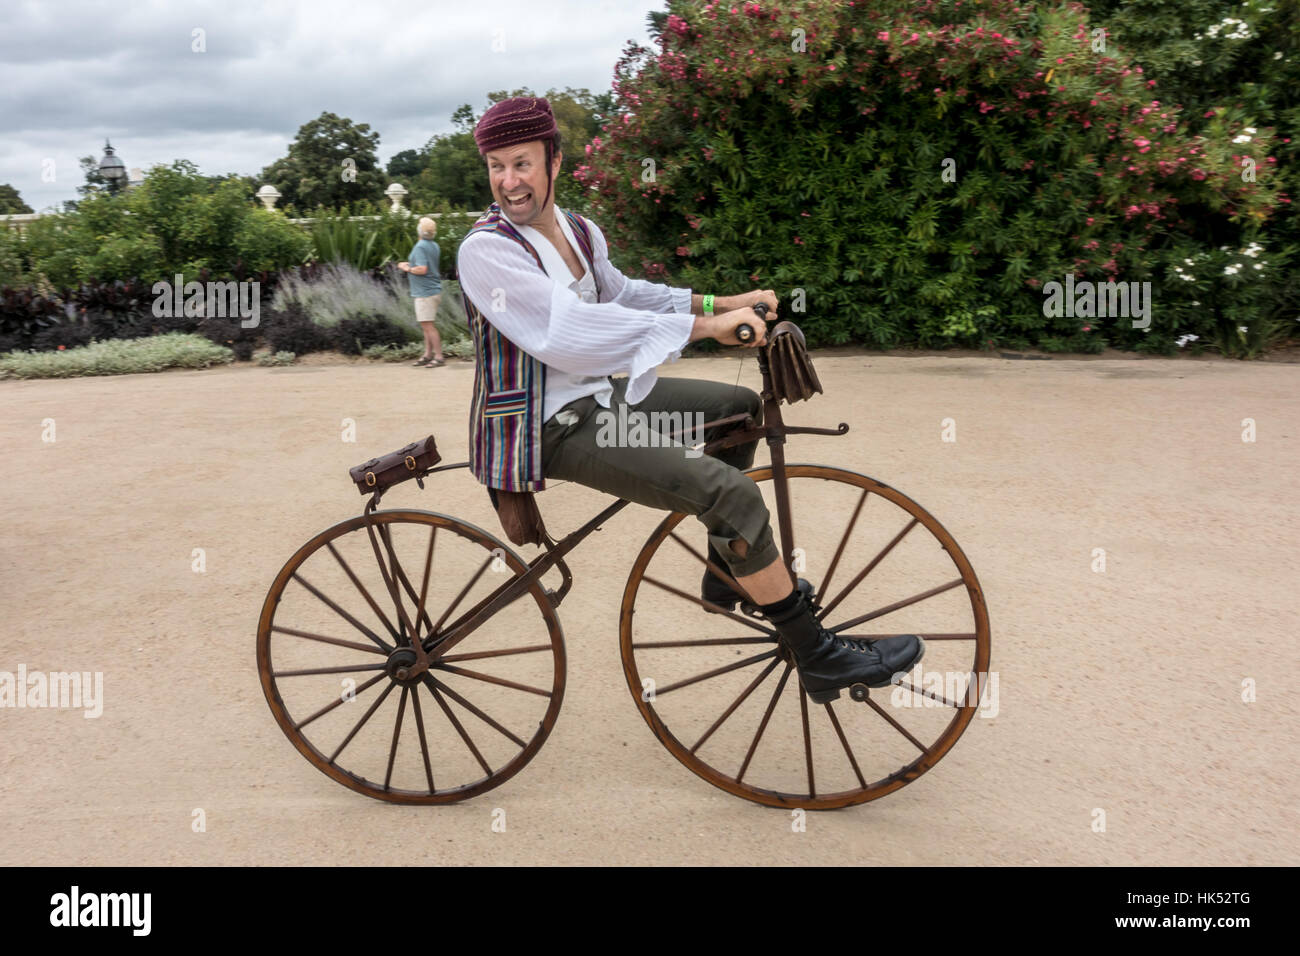 A man rides a Velocvelocipede (fast foot), bicycle commonly known as a boneshaker popular in the mid to late 1800s. Stock Photo